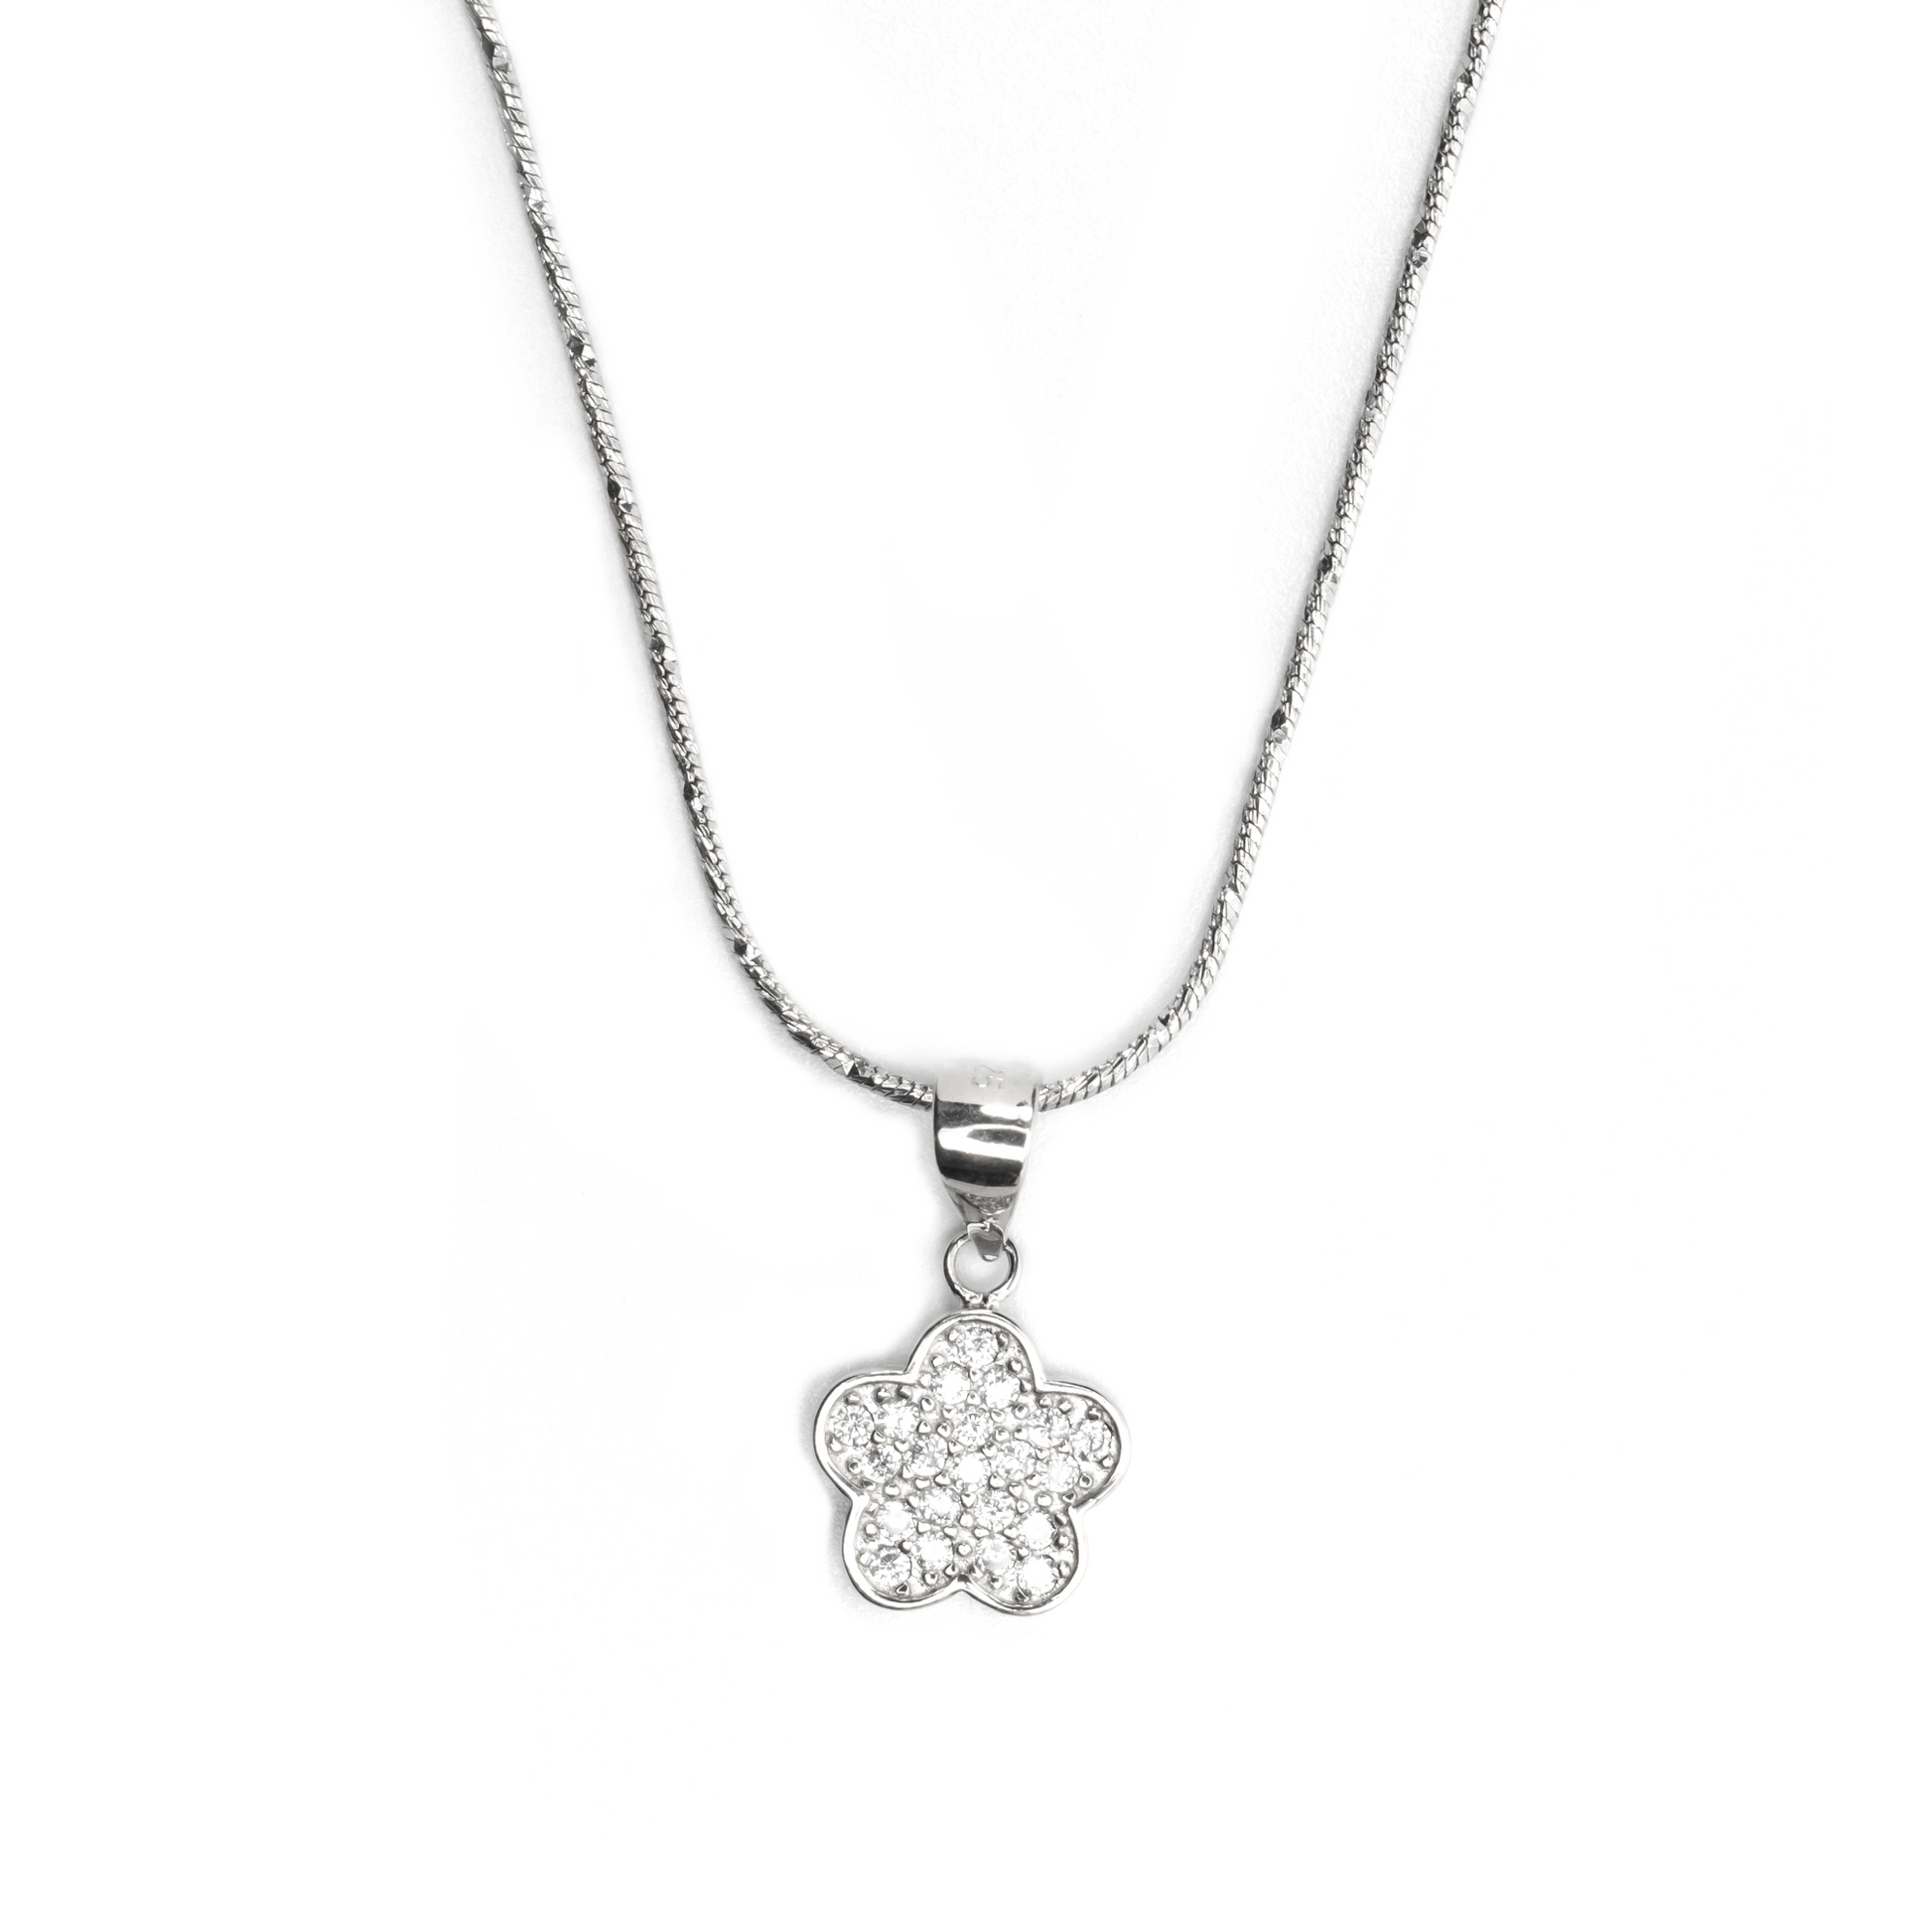 Flower Diamond Pendant in front view